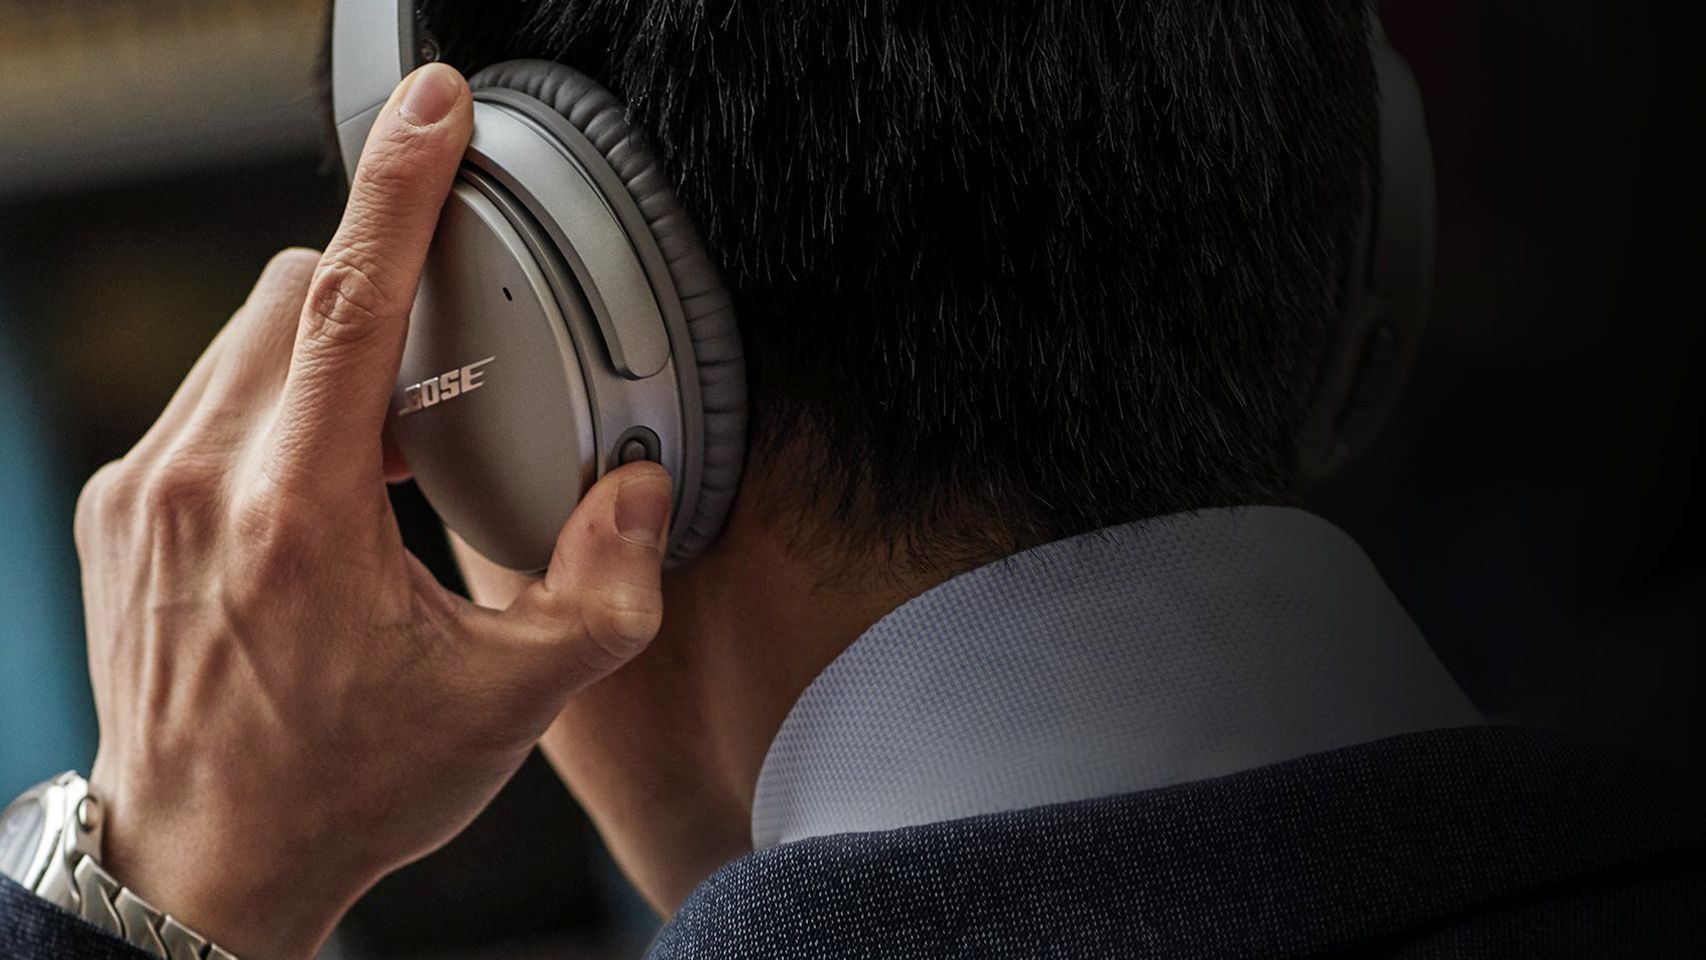 Bose QuietComfort 35 Series II Review: The Best Noise-Canceling